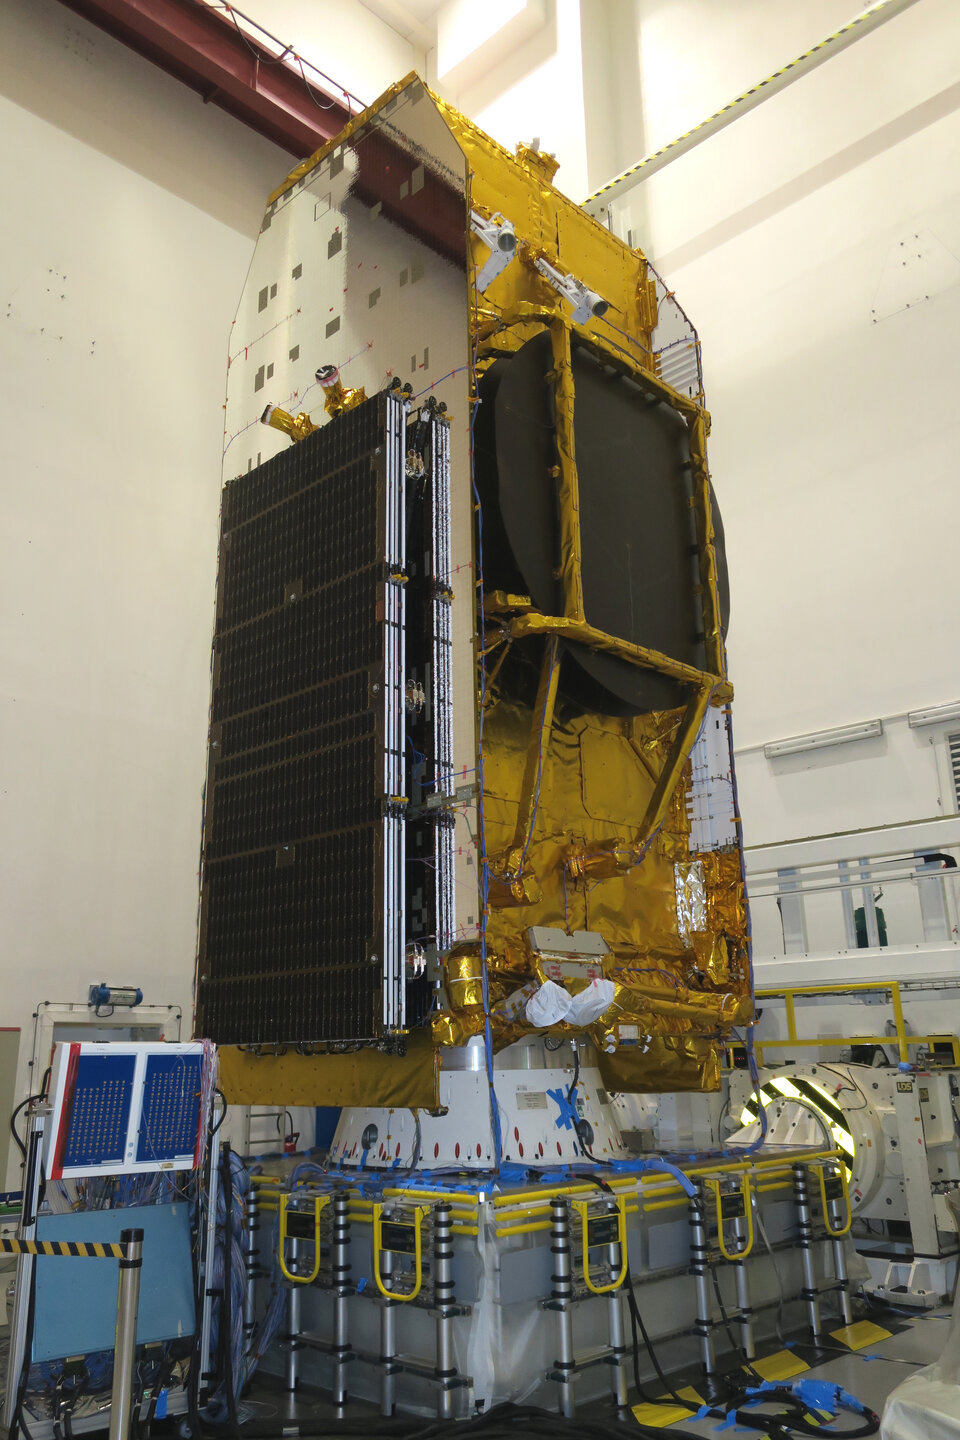 The Eutelsat Hotbird 13F satellite at the Airbus test facility in Toulouse